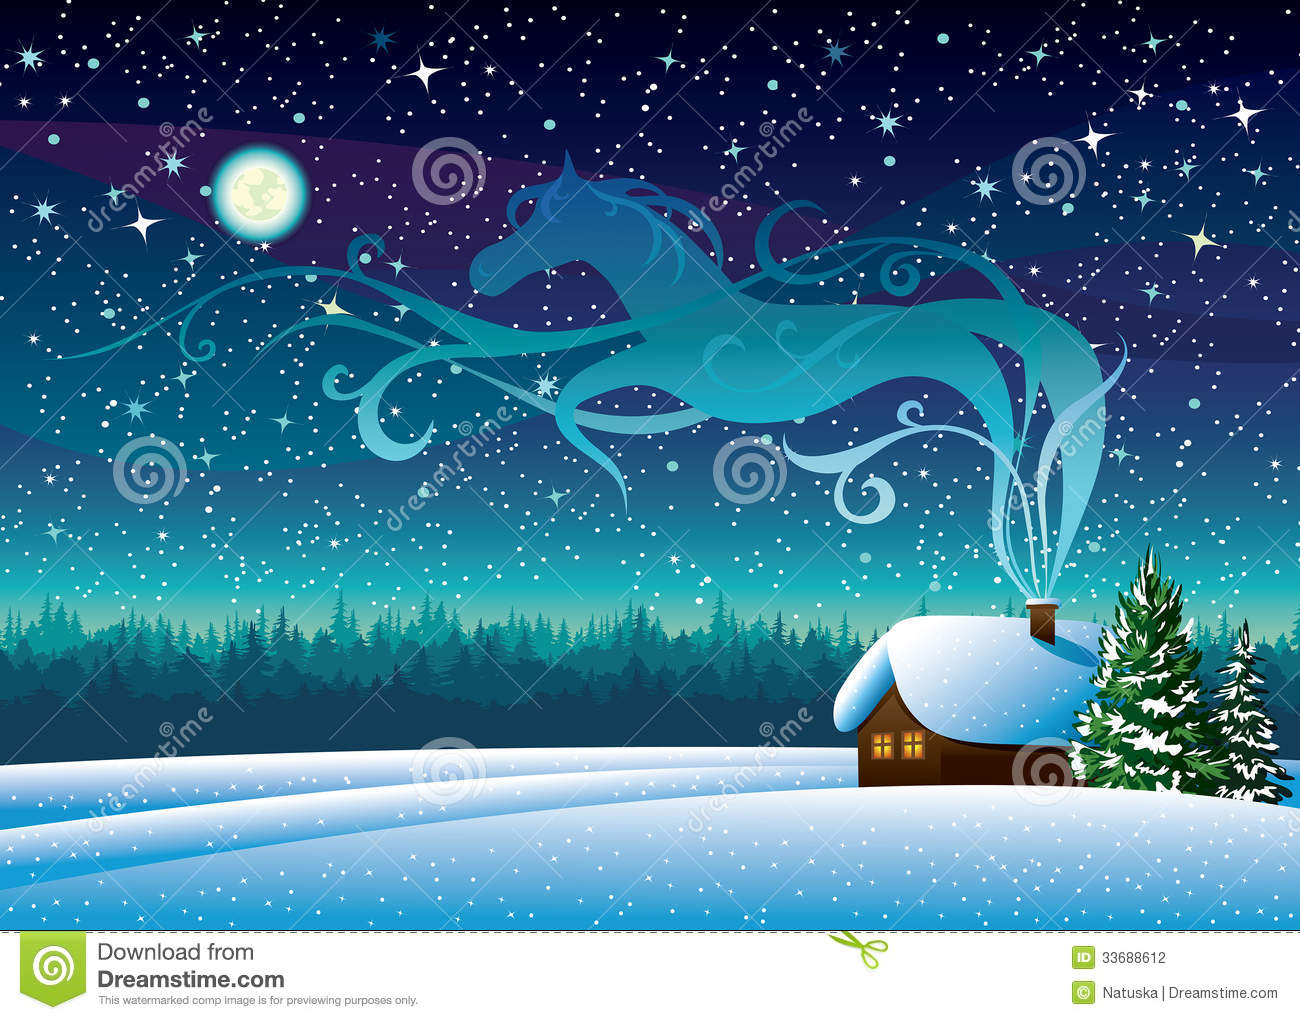 Winter Landscape With Snow Hut And Magic Horse Silhouette On A Starry